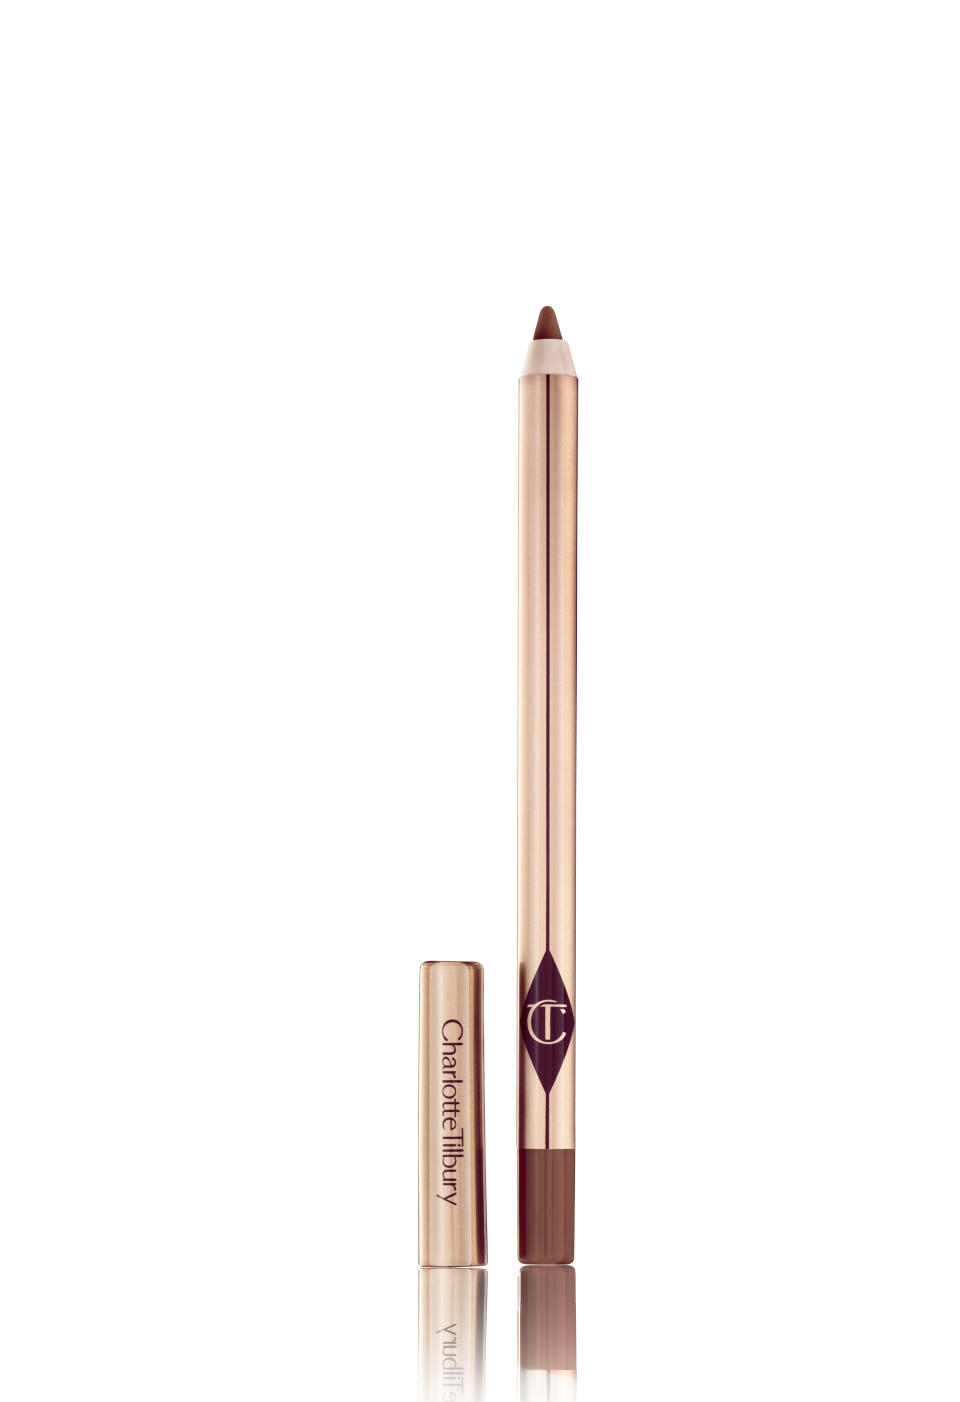 Charlotte Tilbury Lip Cheat Lip Liner in Foxy Brown, $25 at Sephora and Ulta Beauty